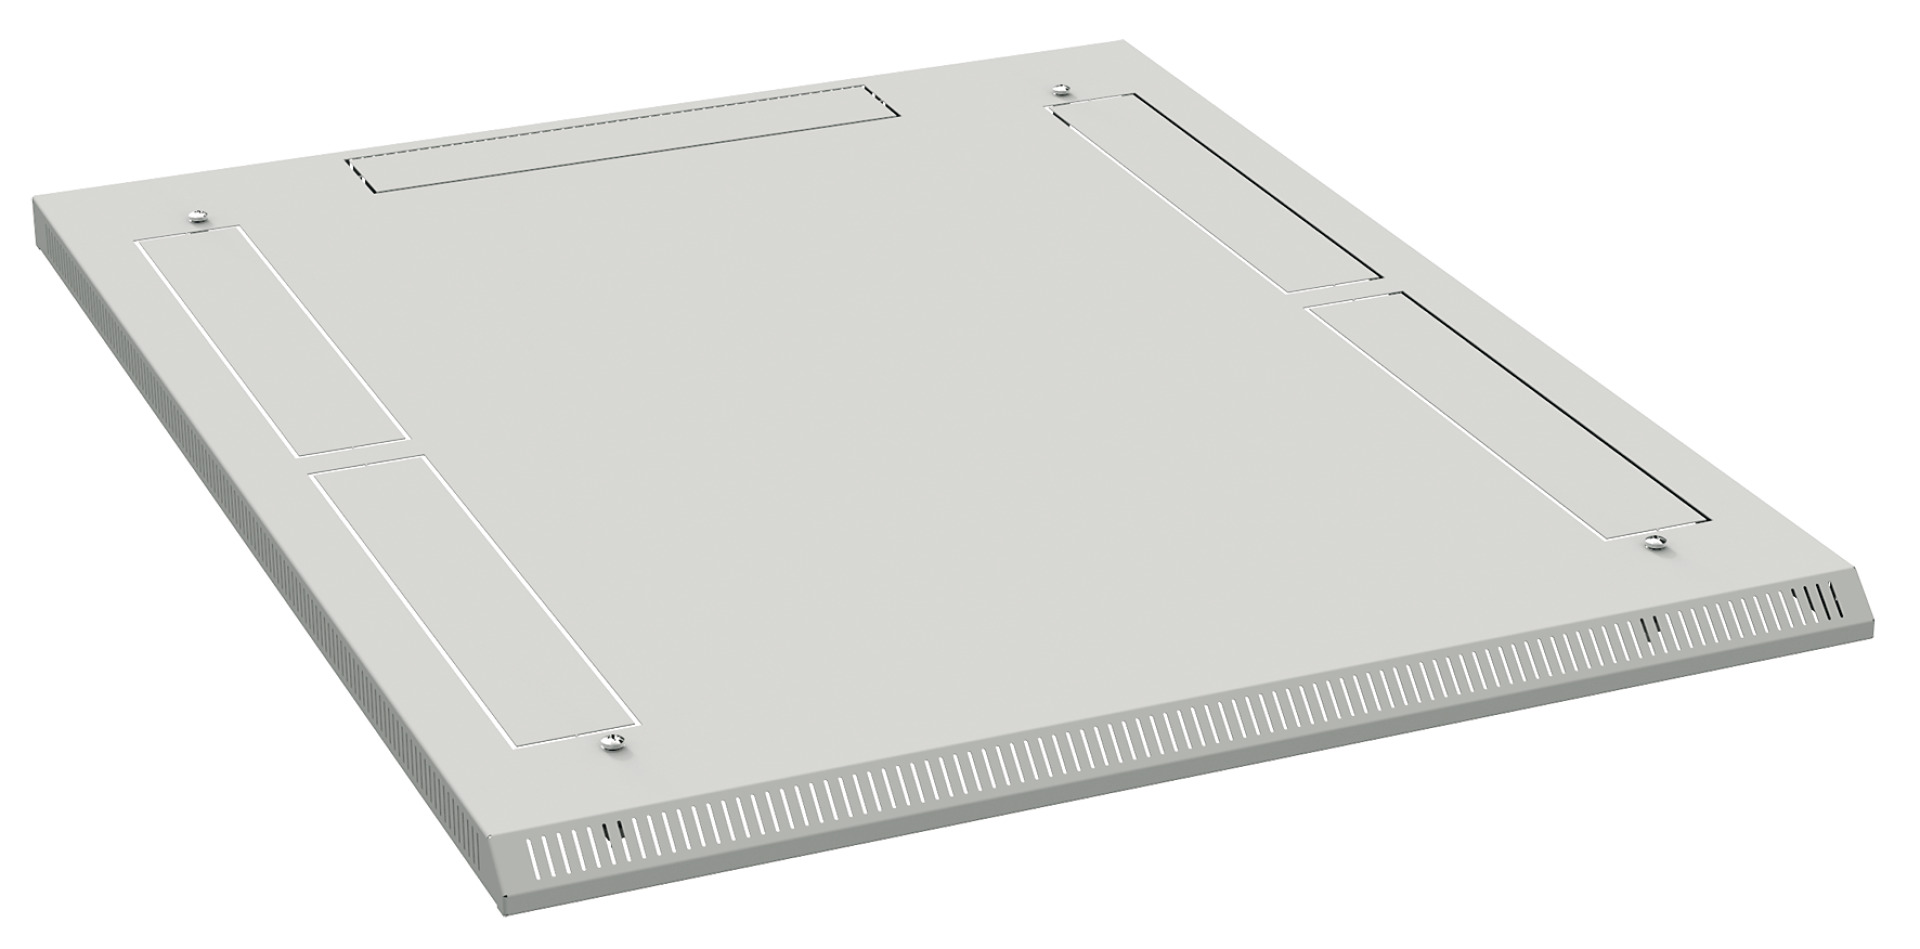 Additional Roof H=40 mm, 800x600 mm, RAL9005, for Cabinet Series PRO